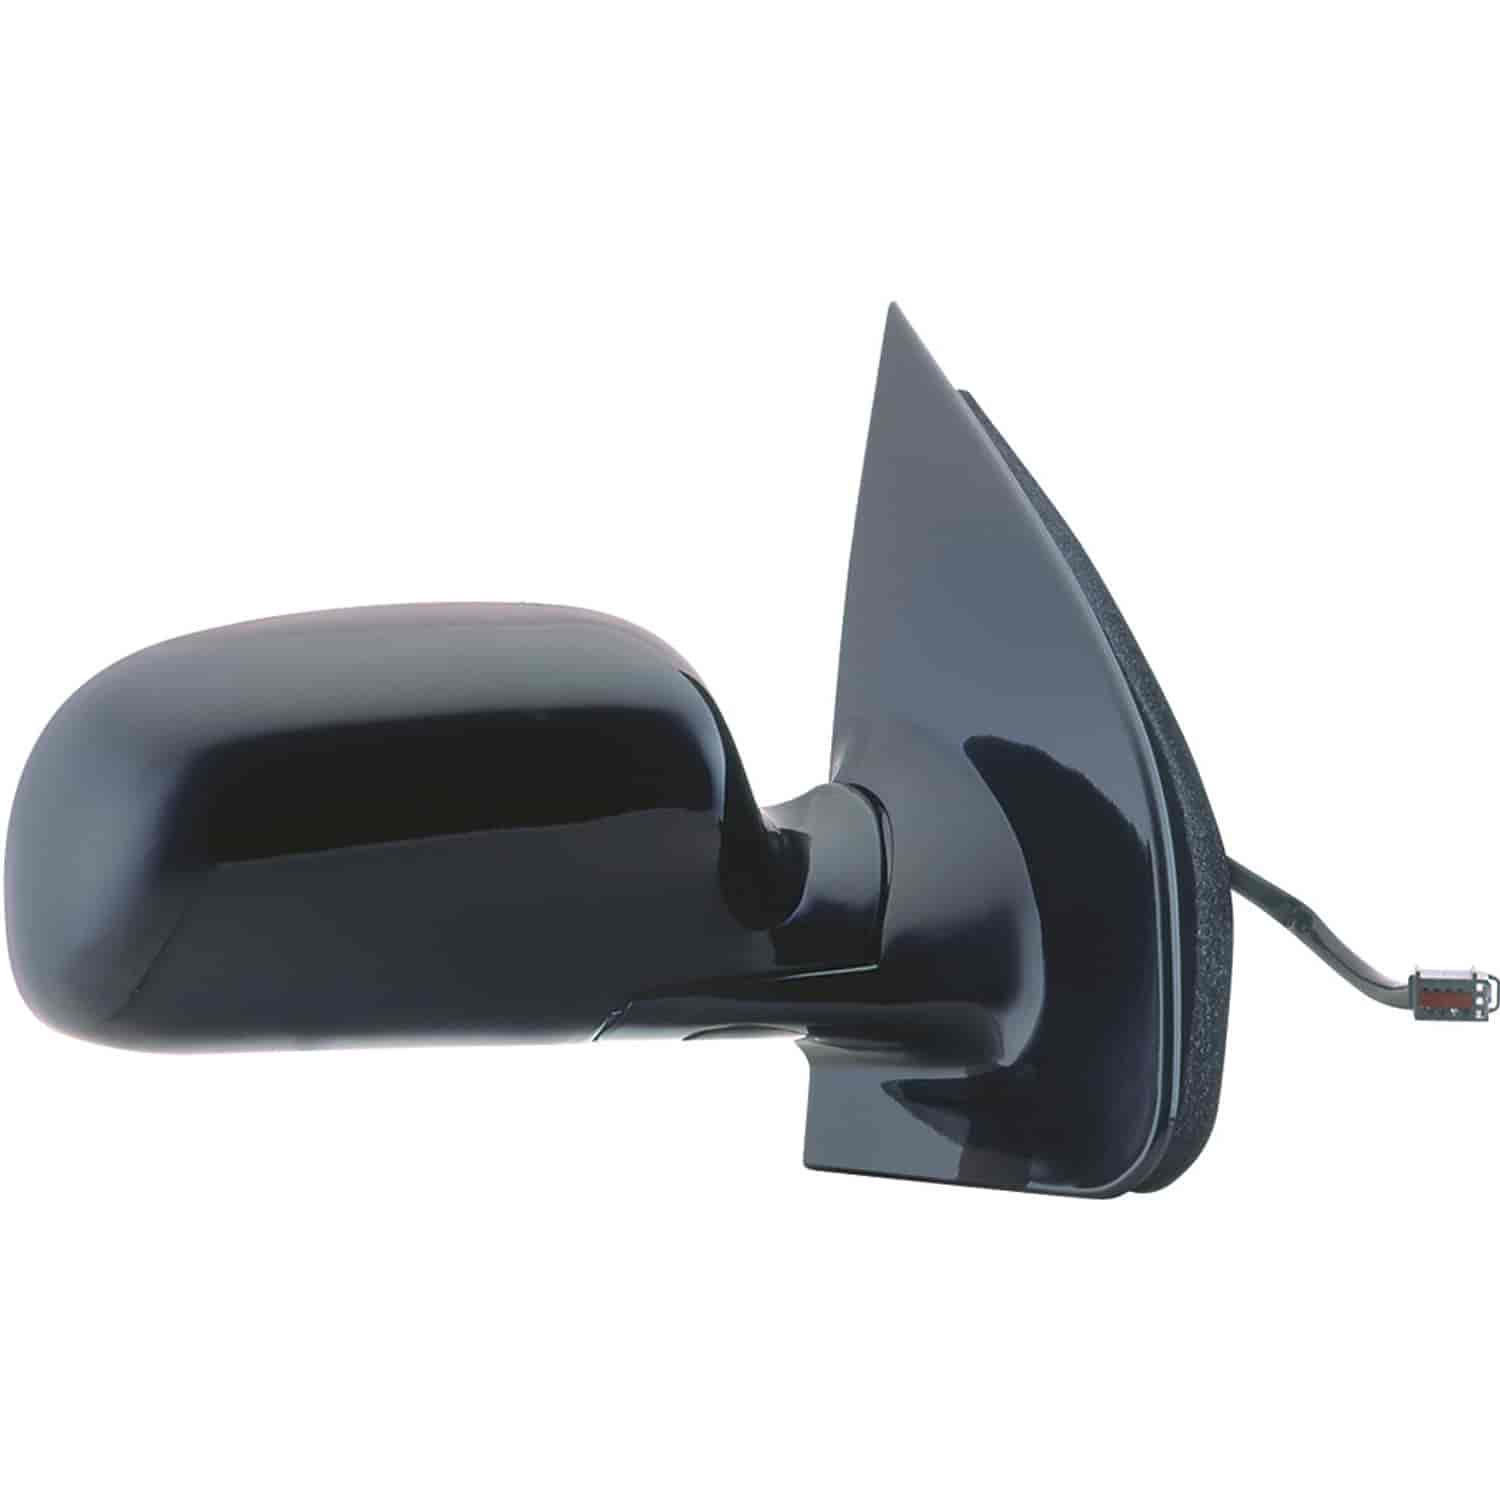 OEM Style Replacement mirror for 01-02 Ford Windstar passenger side mirror tested to fit and functio